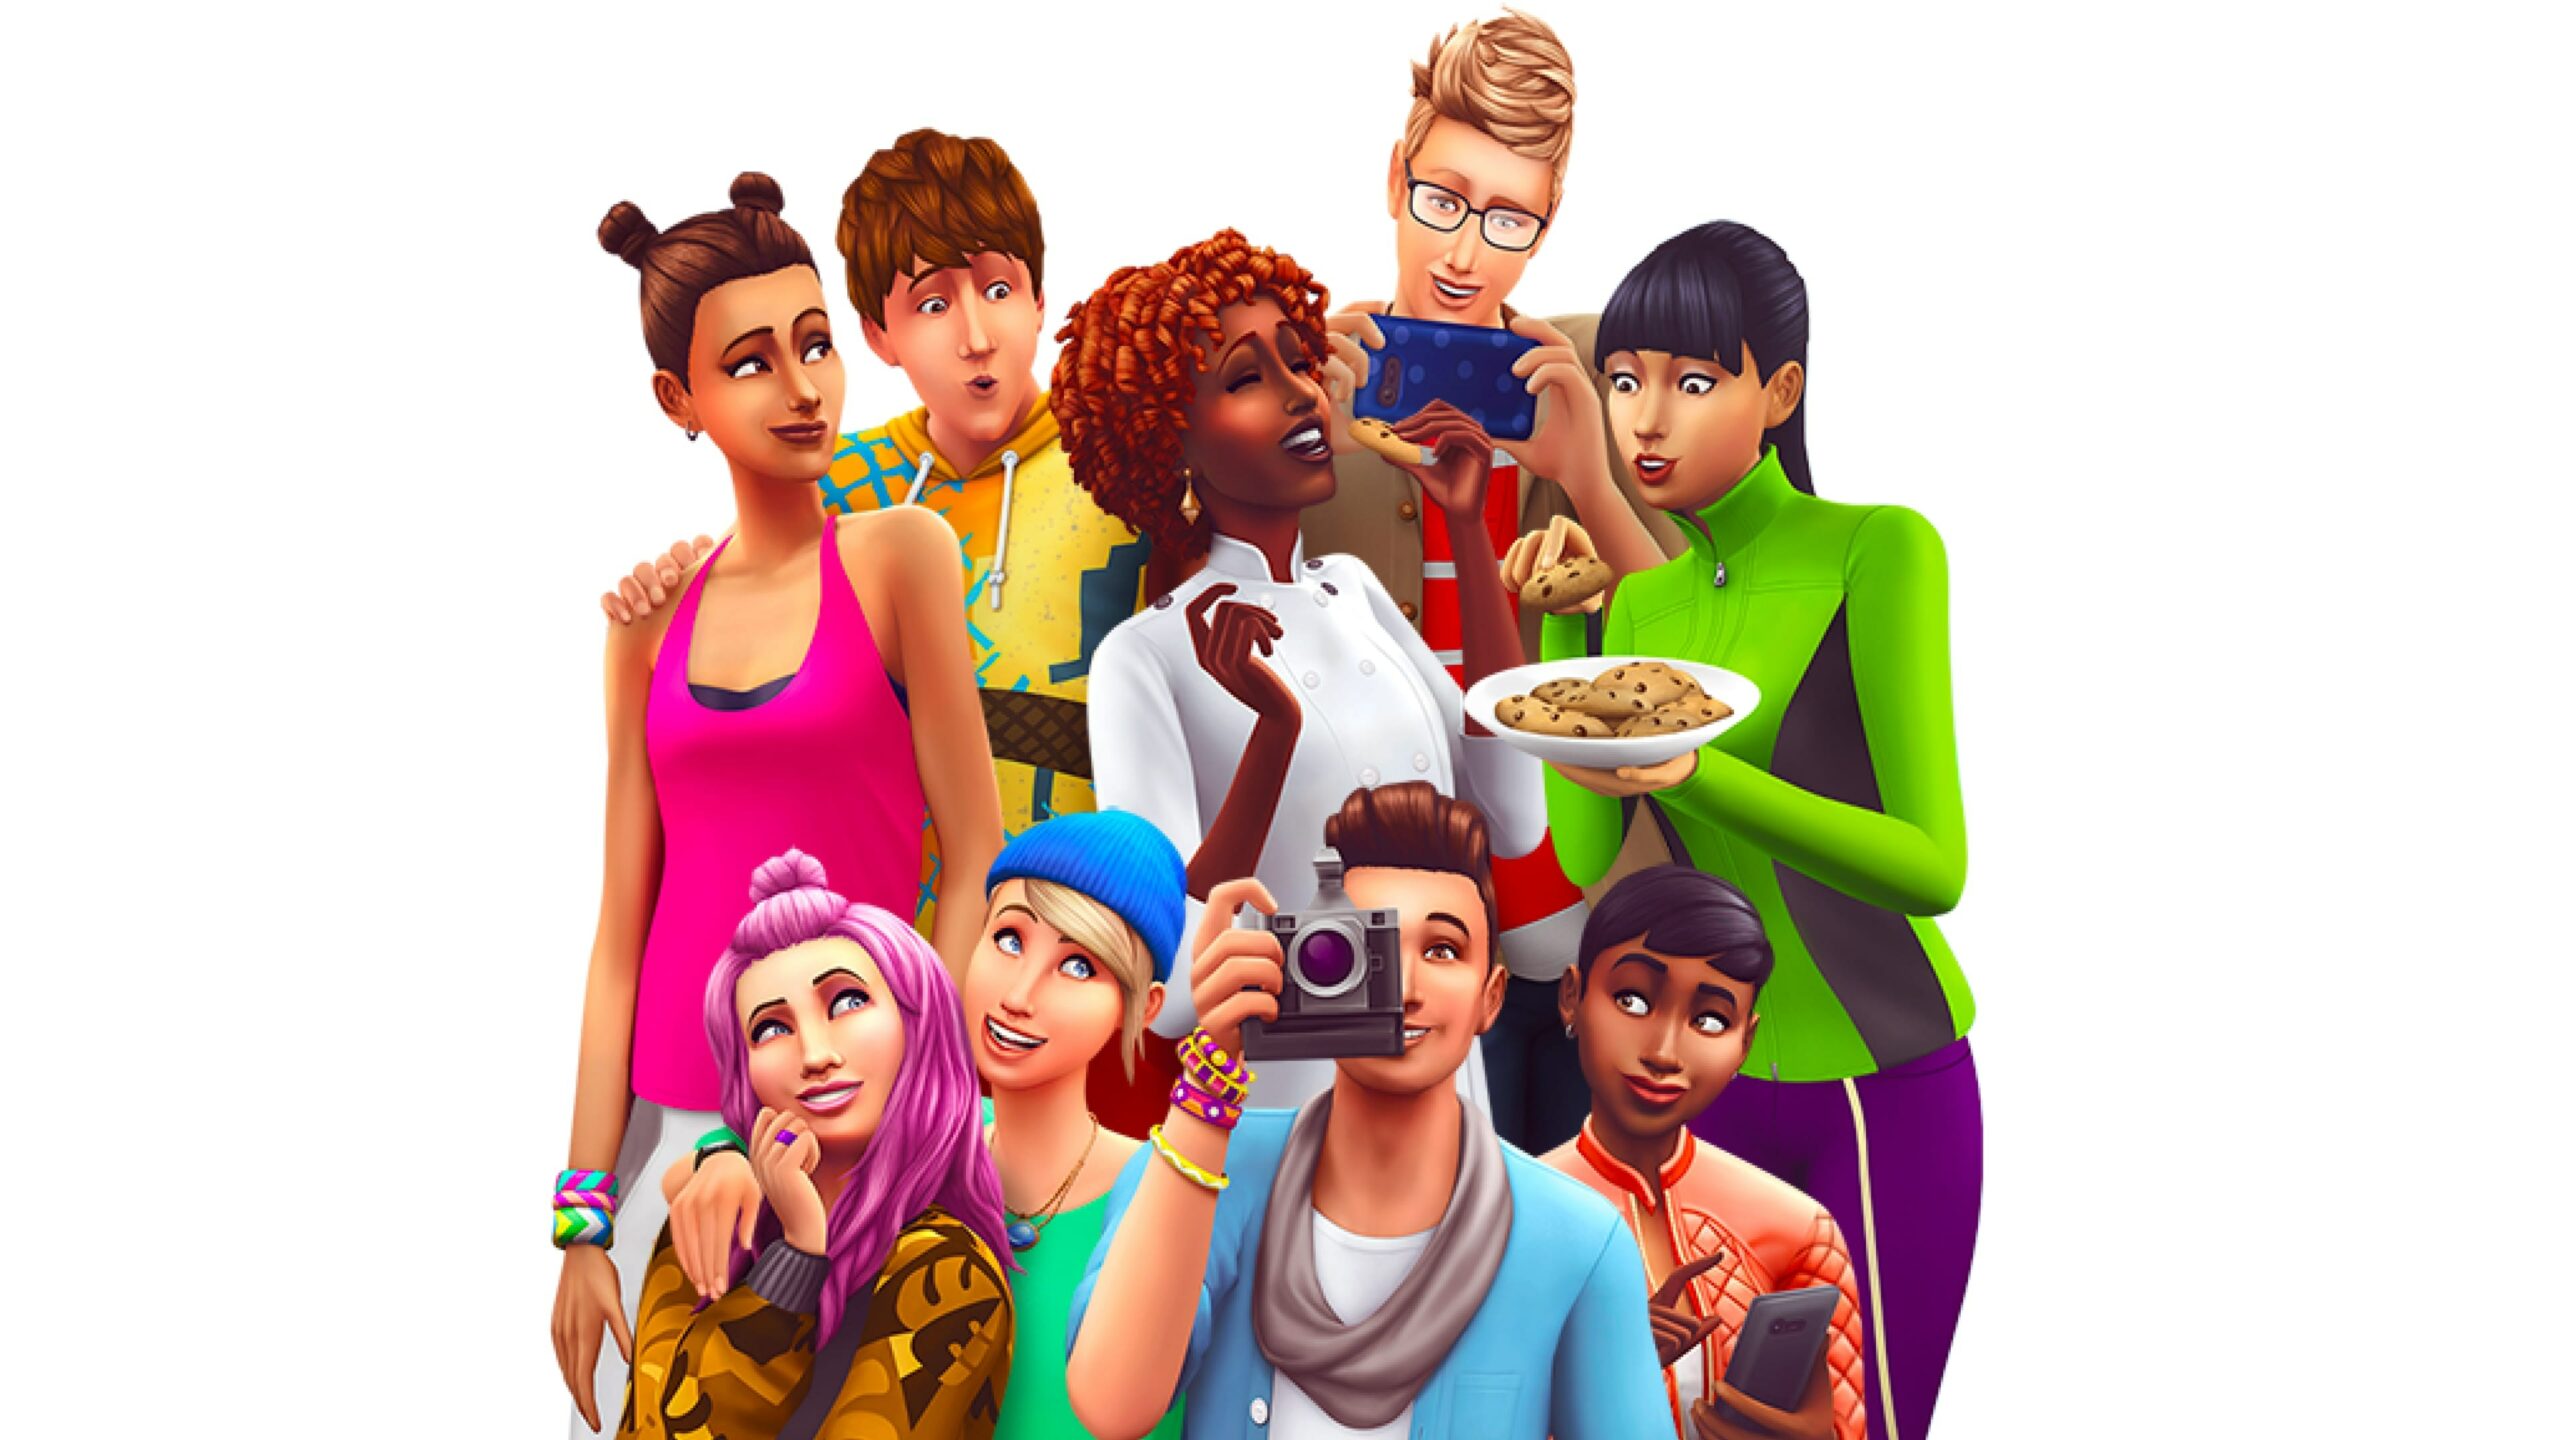 Read more about the article „The Sims 4” – zmierzch czy rozkwit?